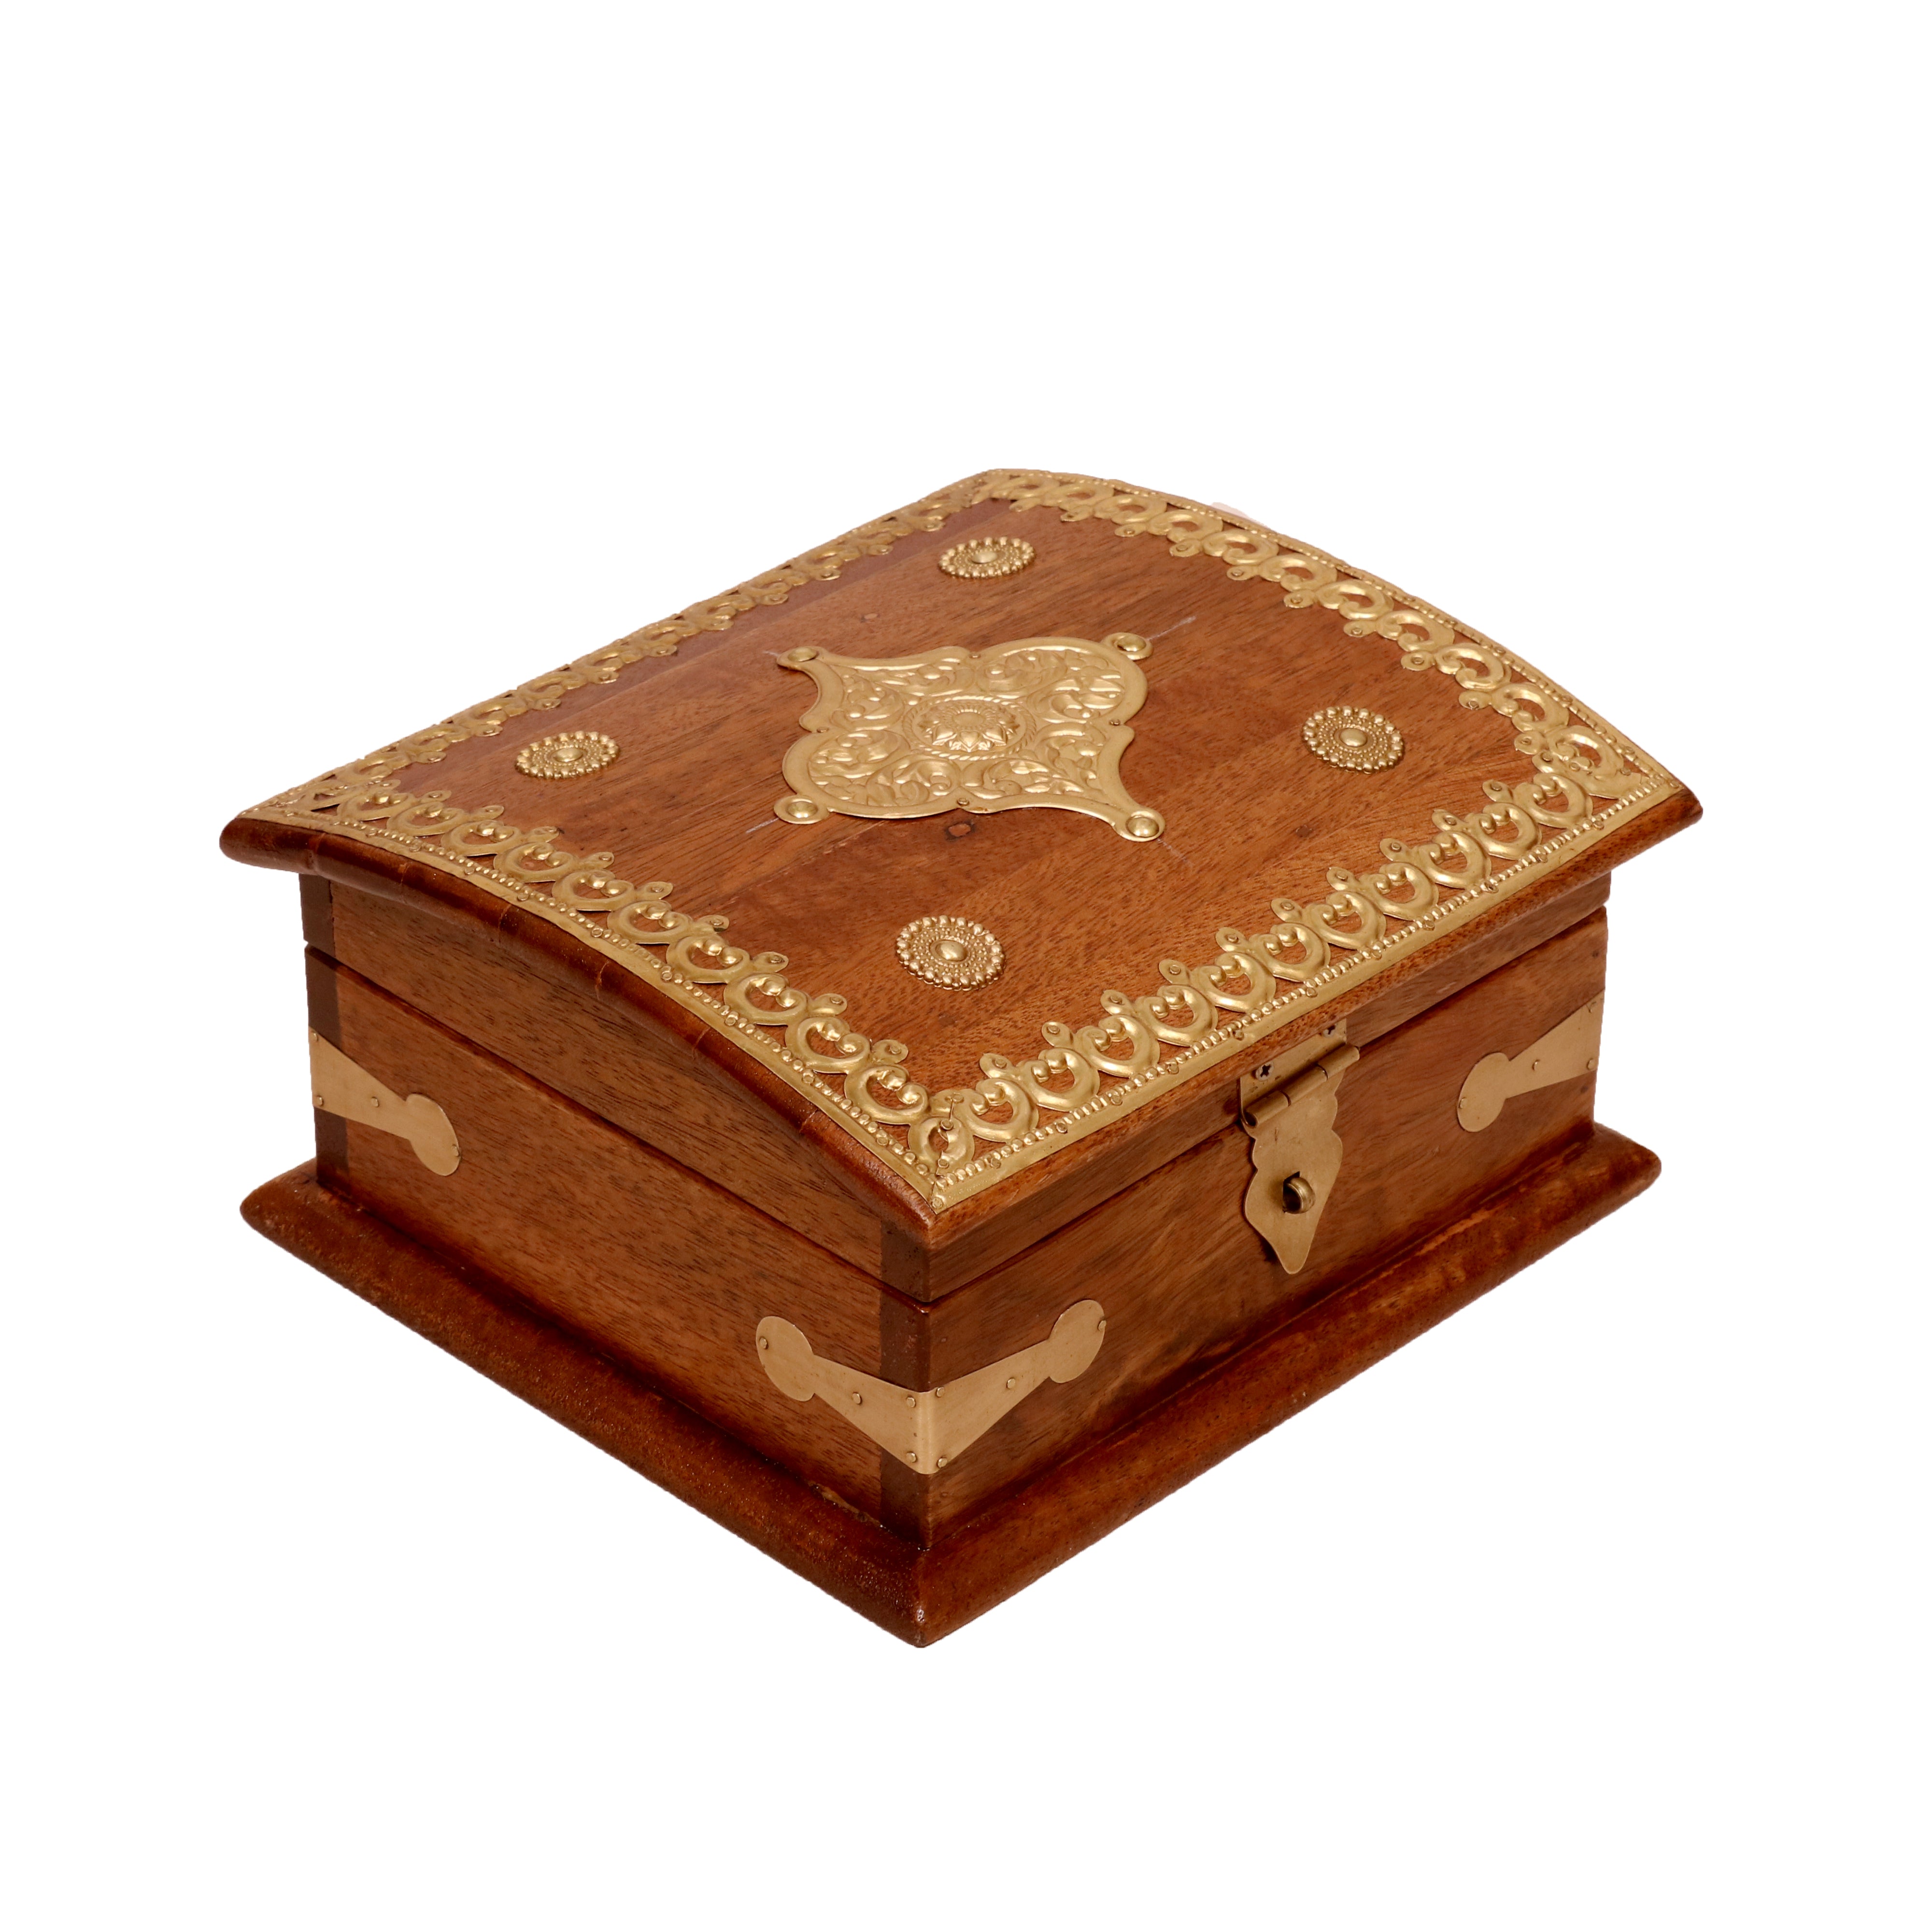 Wooden Curved Boxes Small (7 x 6 x 3.5 Inch) Wooden Box